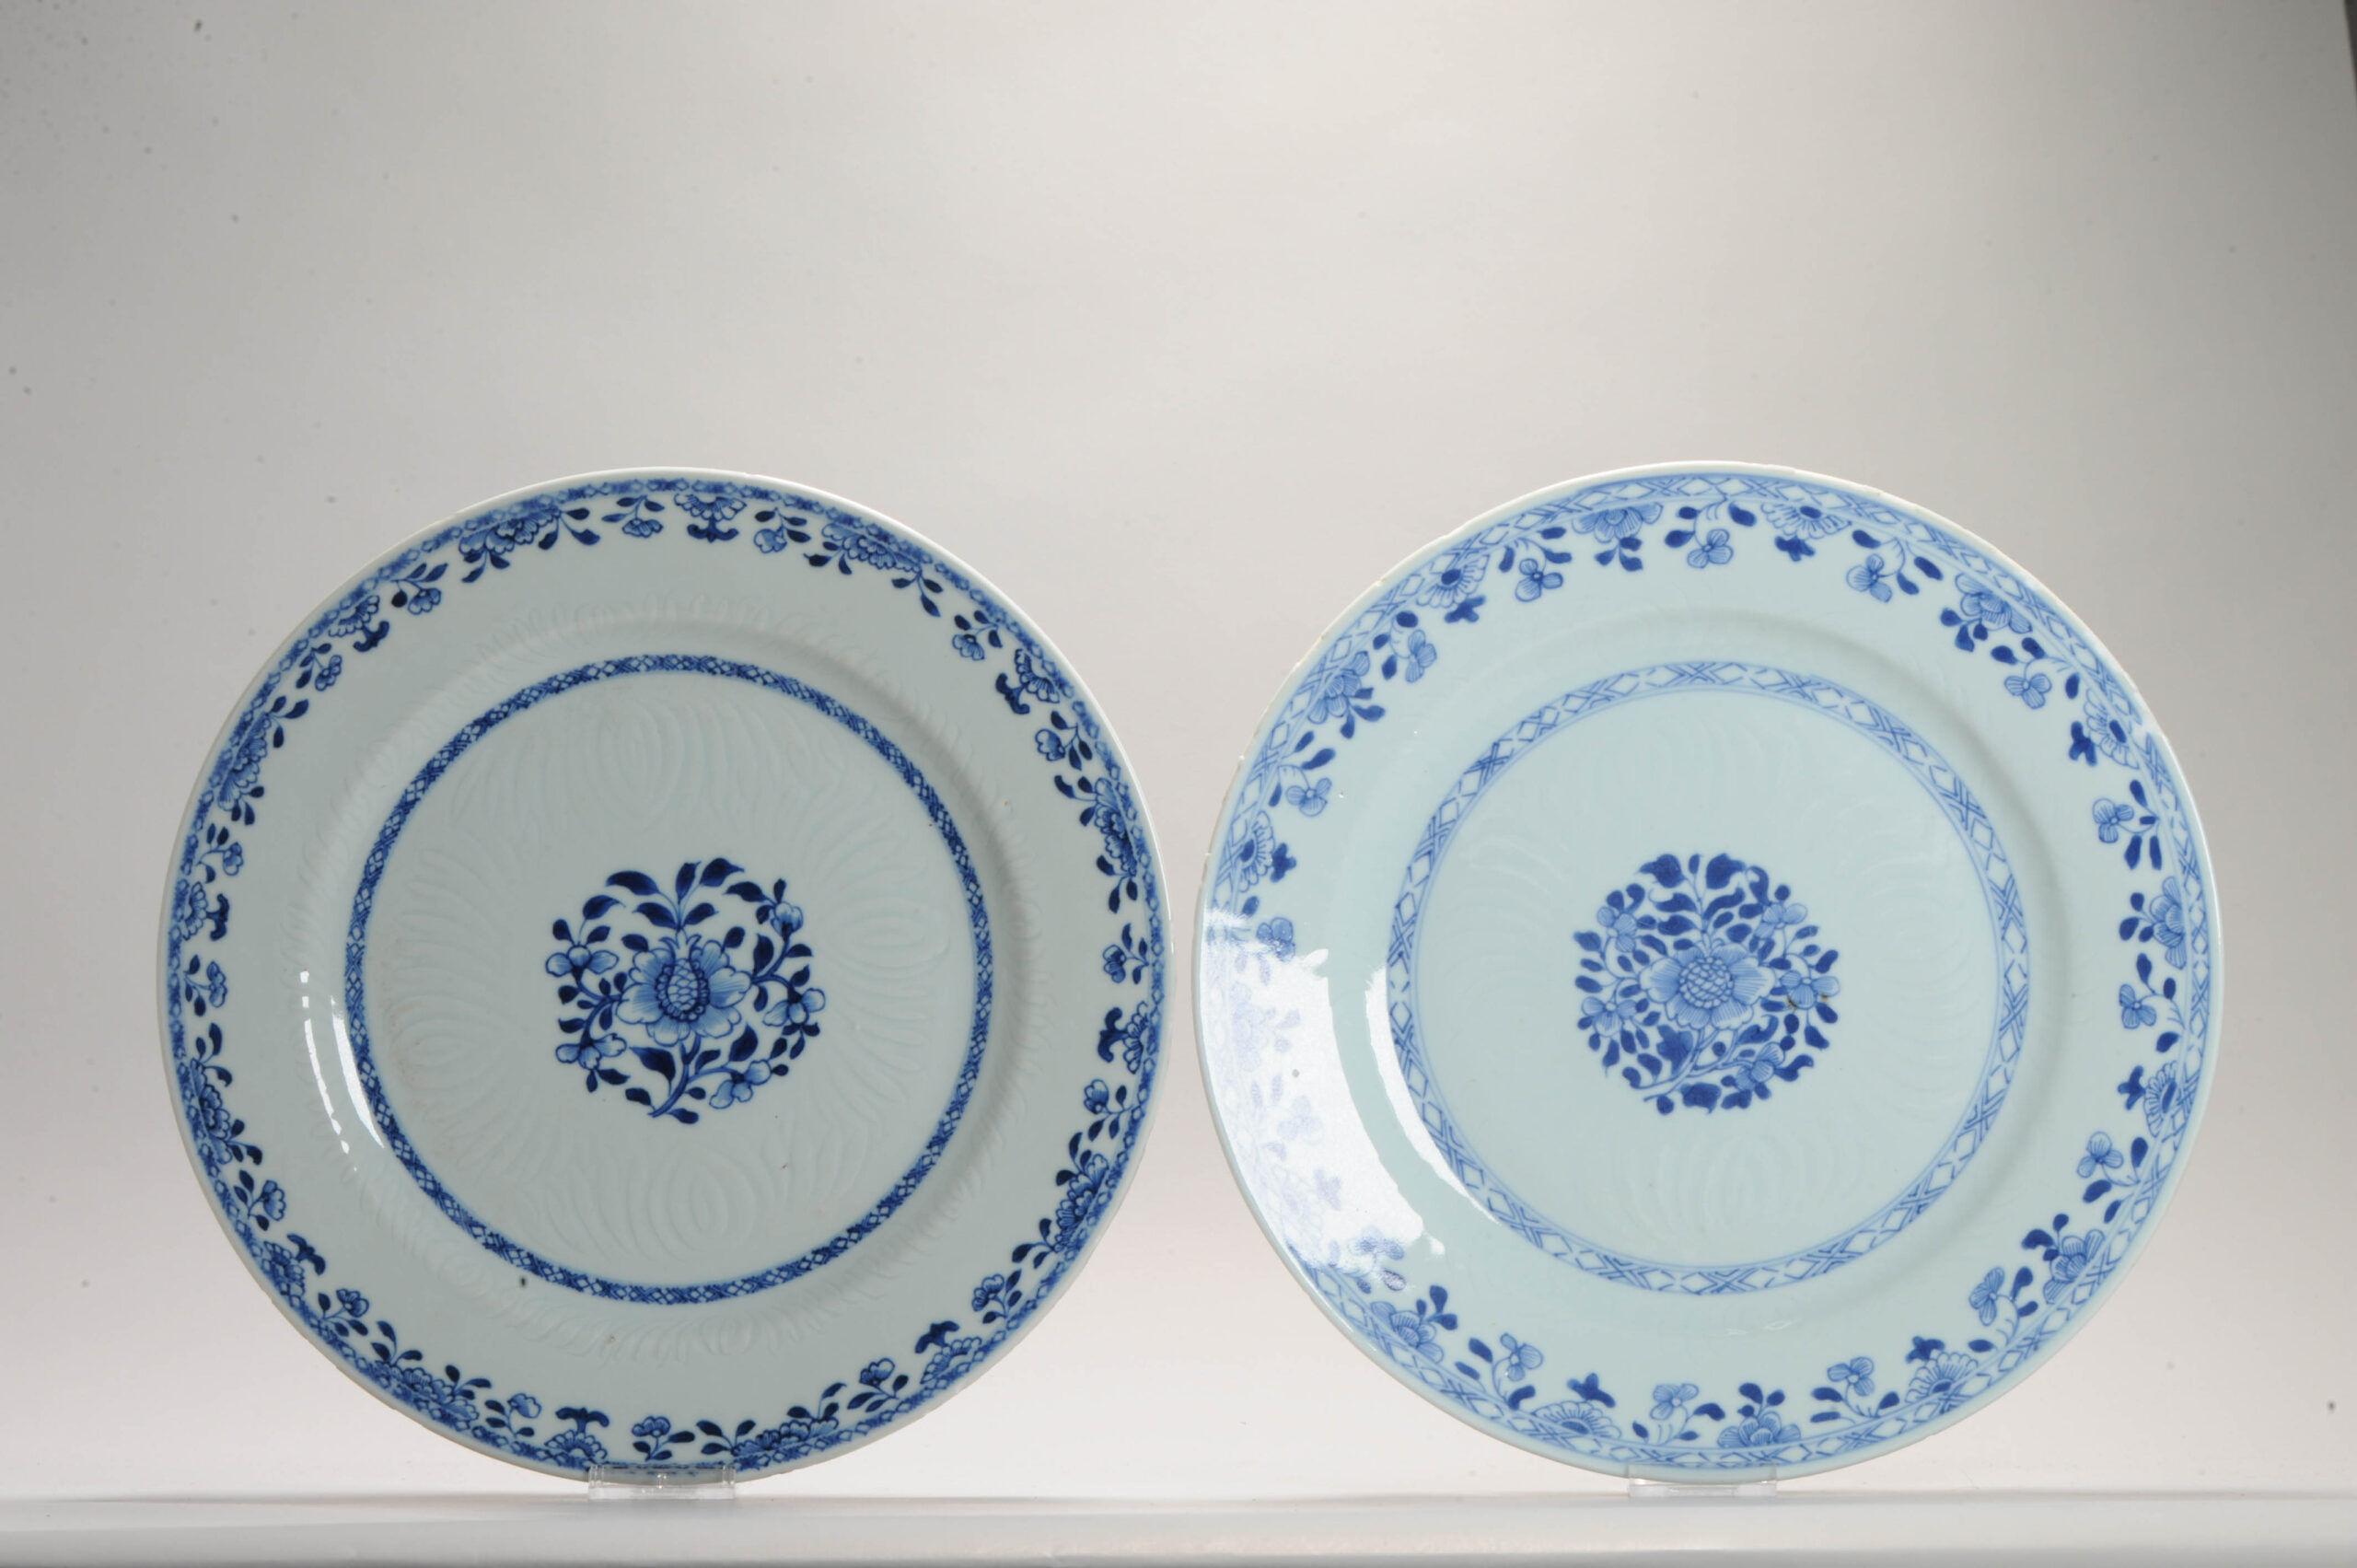 Antique Large Plates 18th Century Chinese Porcelain Blue and White Anhua Qianlong